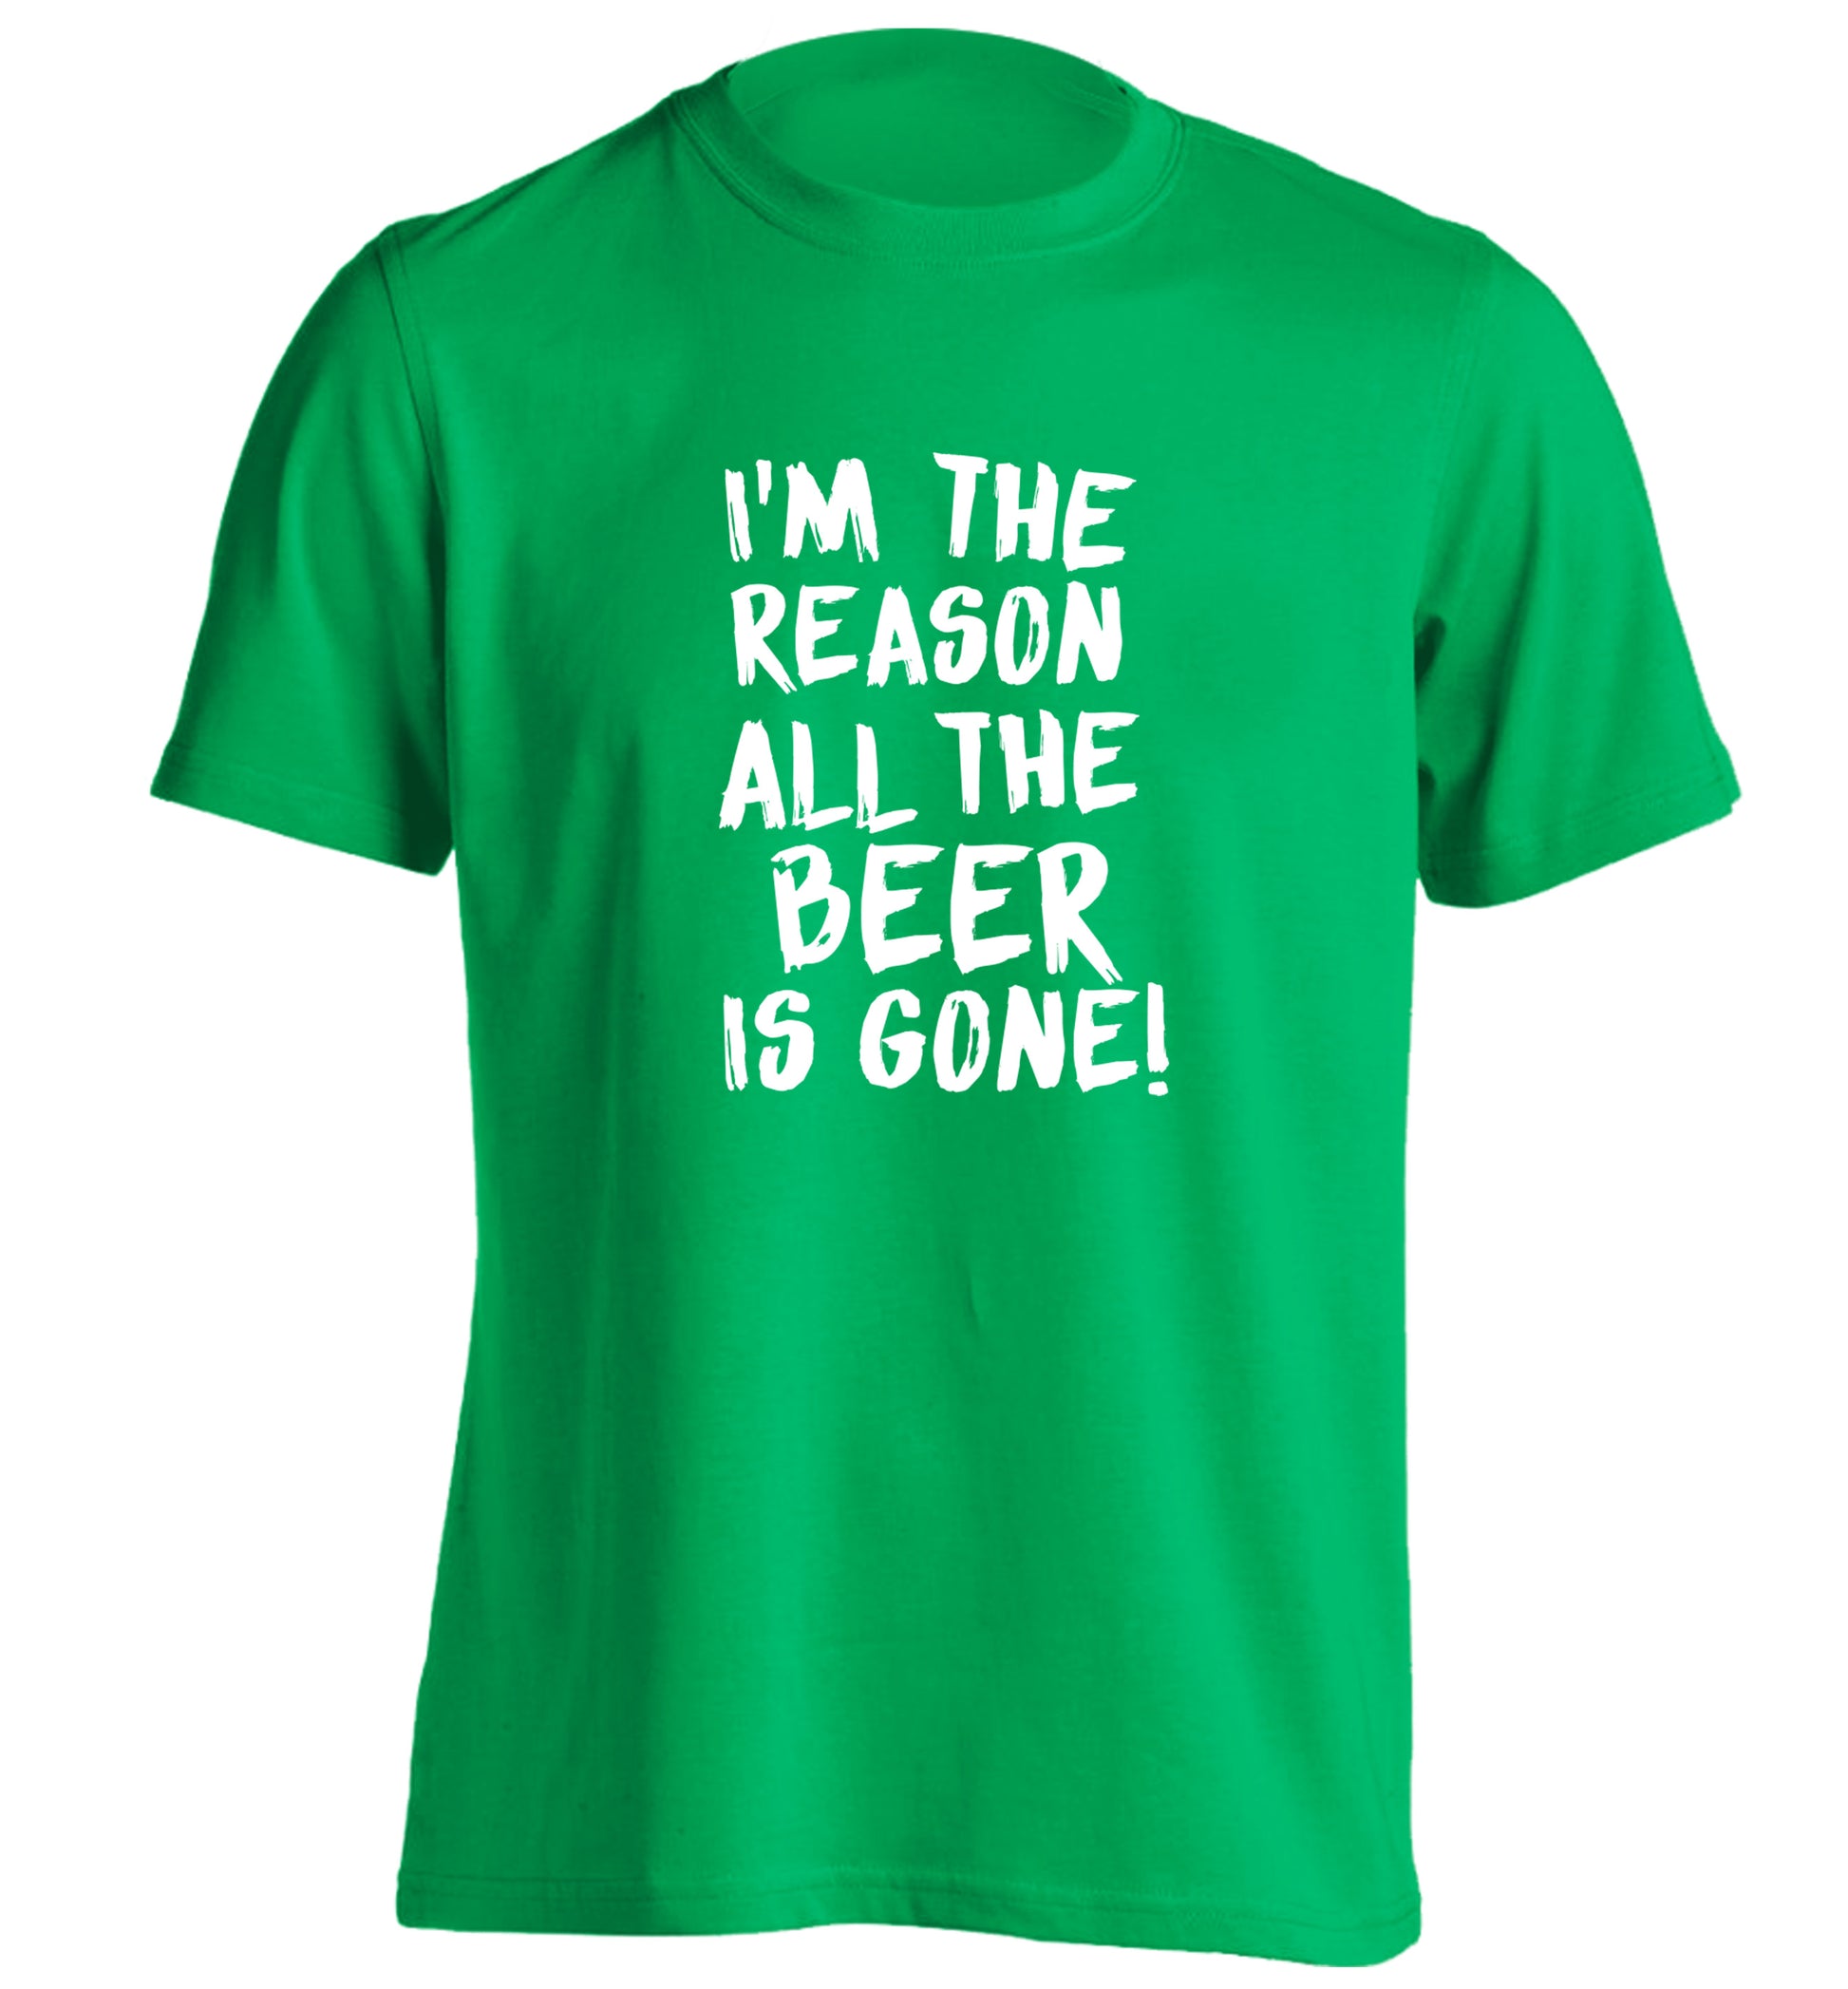 I'm the reason all the beer is gone adults unisex green Tshirt 2XL